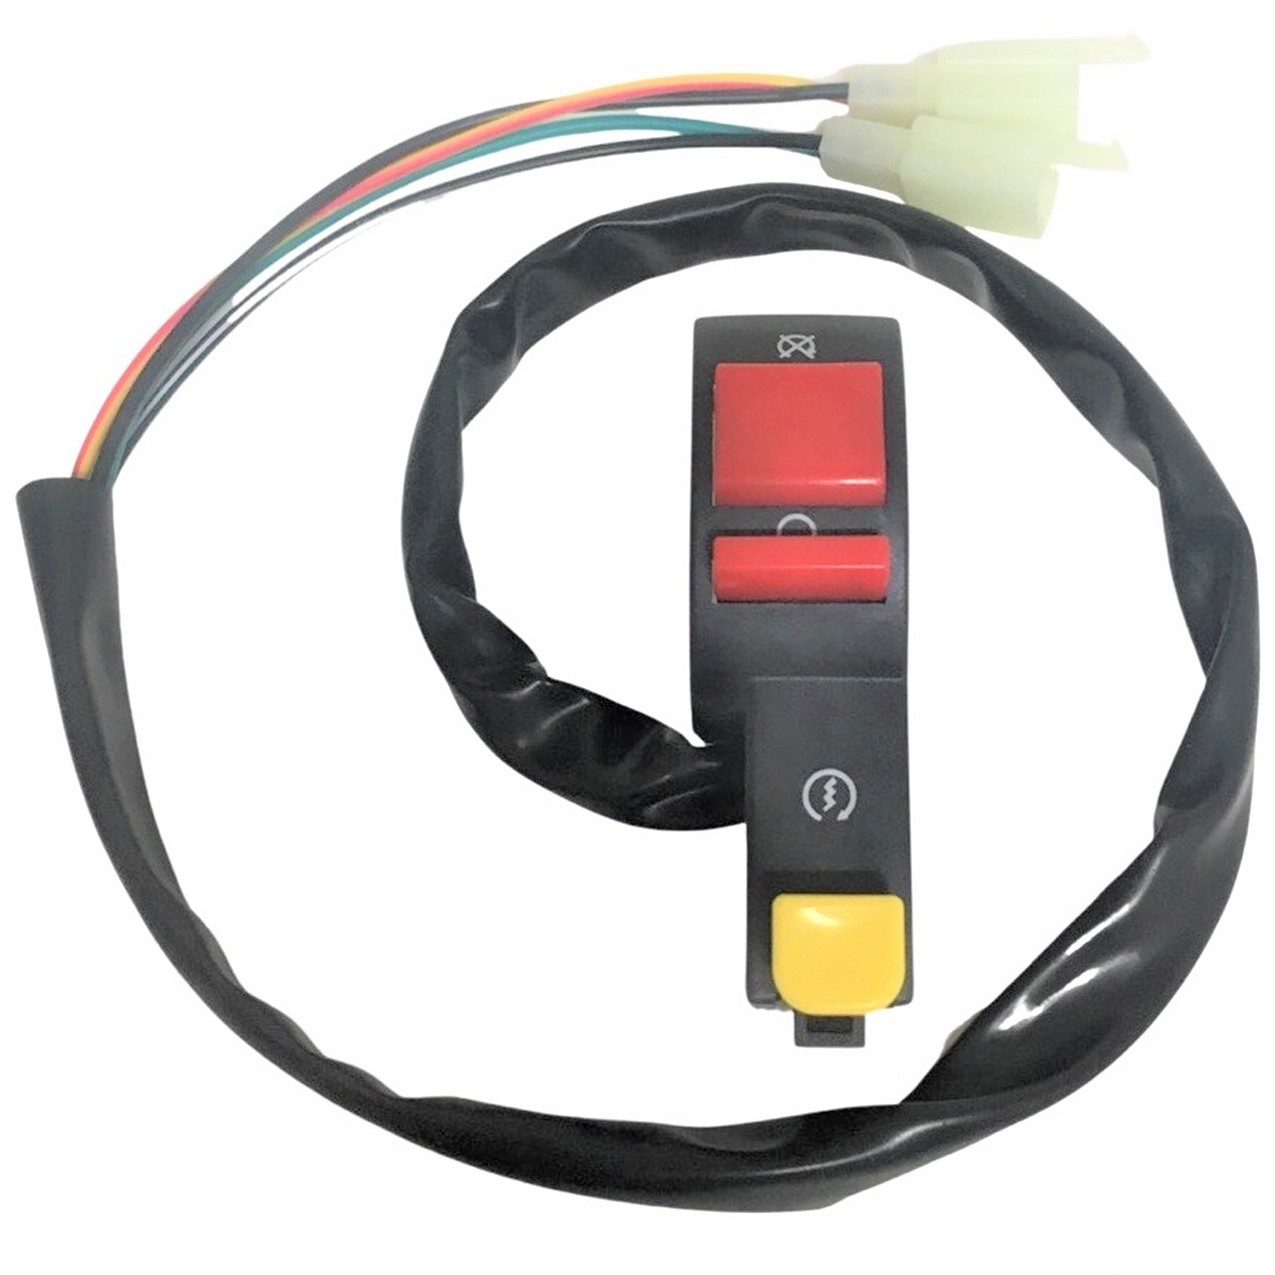 Kill Switch with Electric Start Button 2 Wire Female Jack + 2 Wire Female Jack. Fits Many Dirt Bikes and ATV's